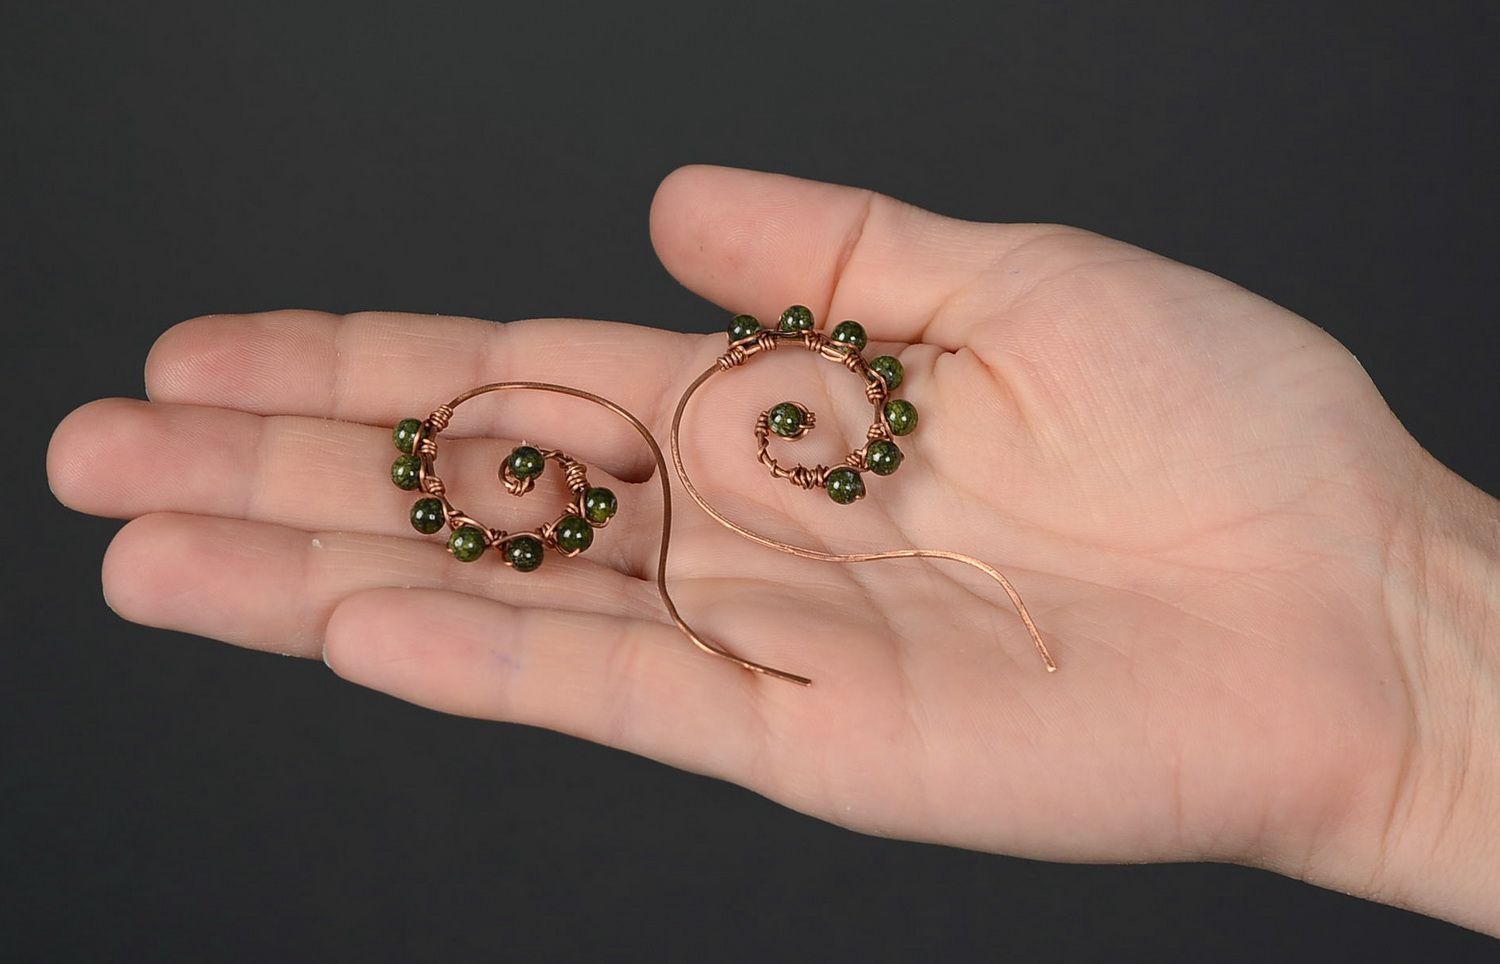 Eaarrings made of copper wire, stone - serpentine photo 5